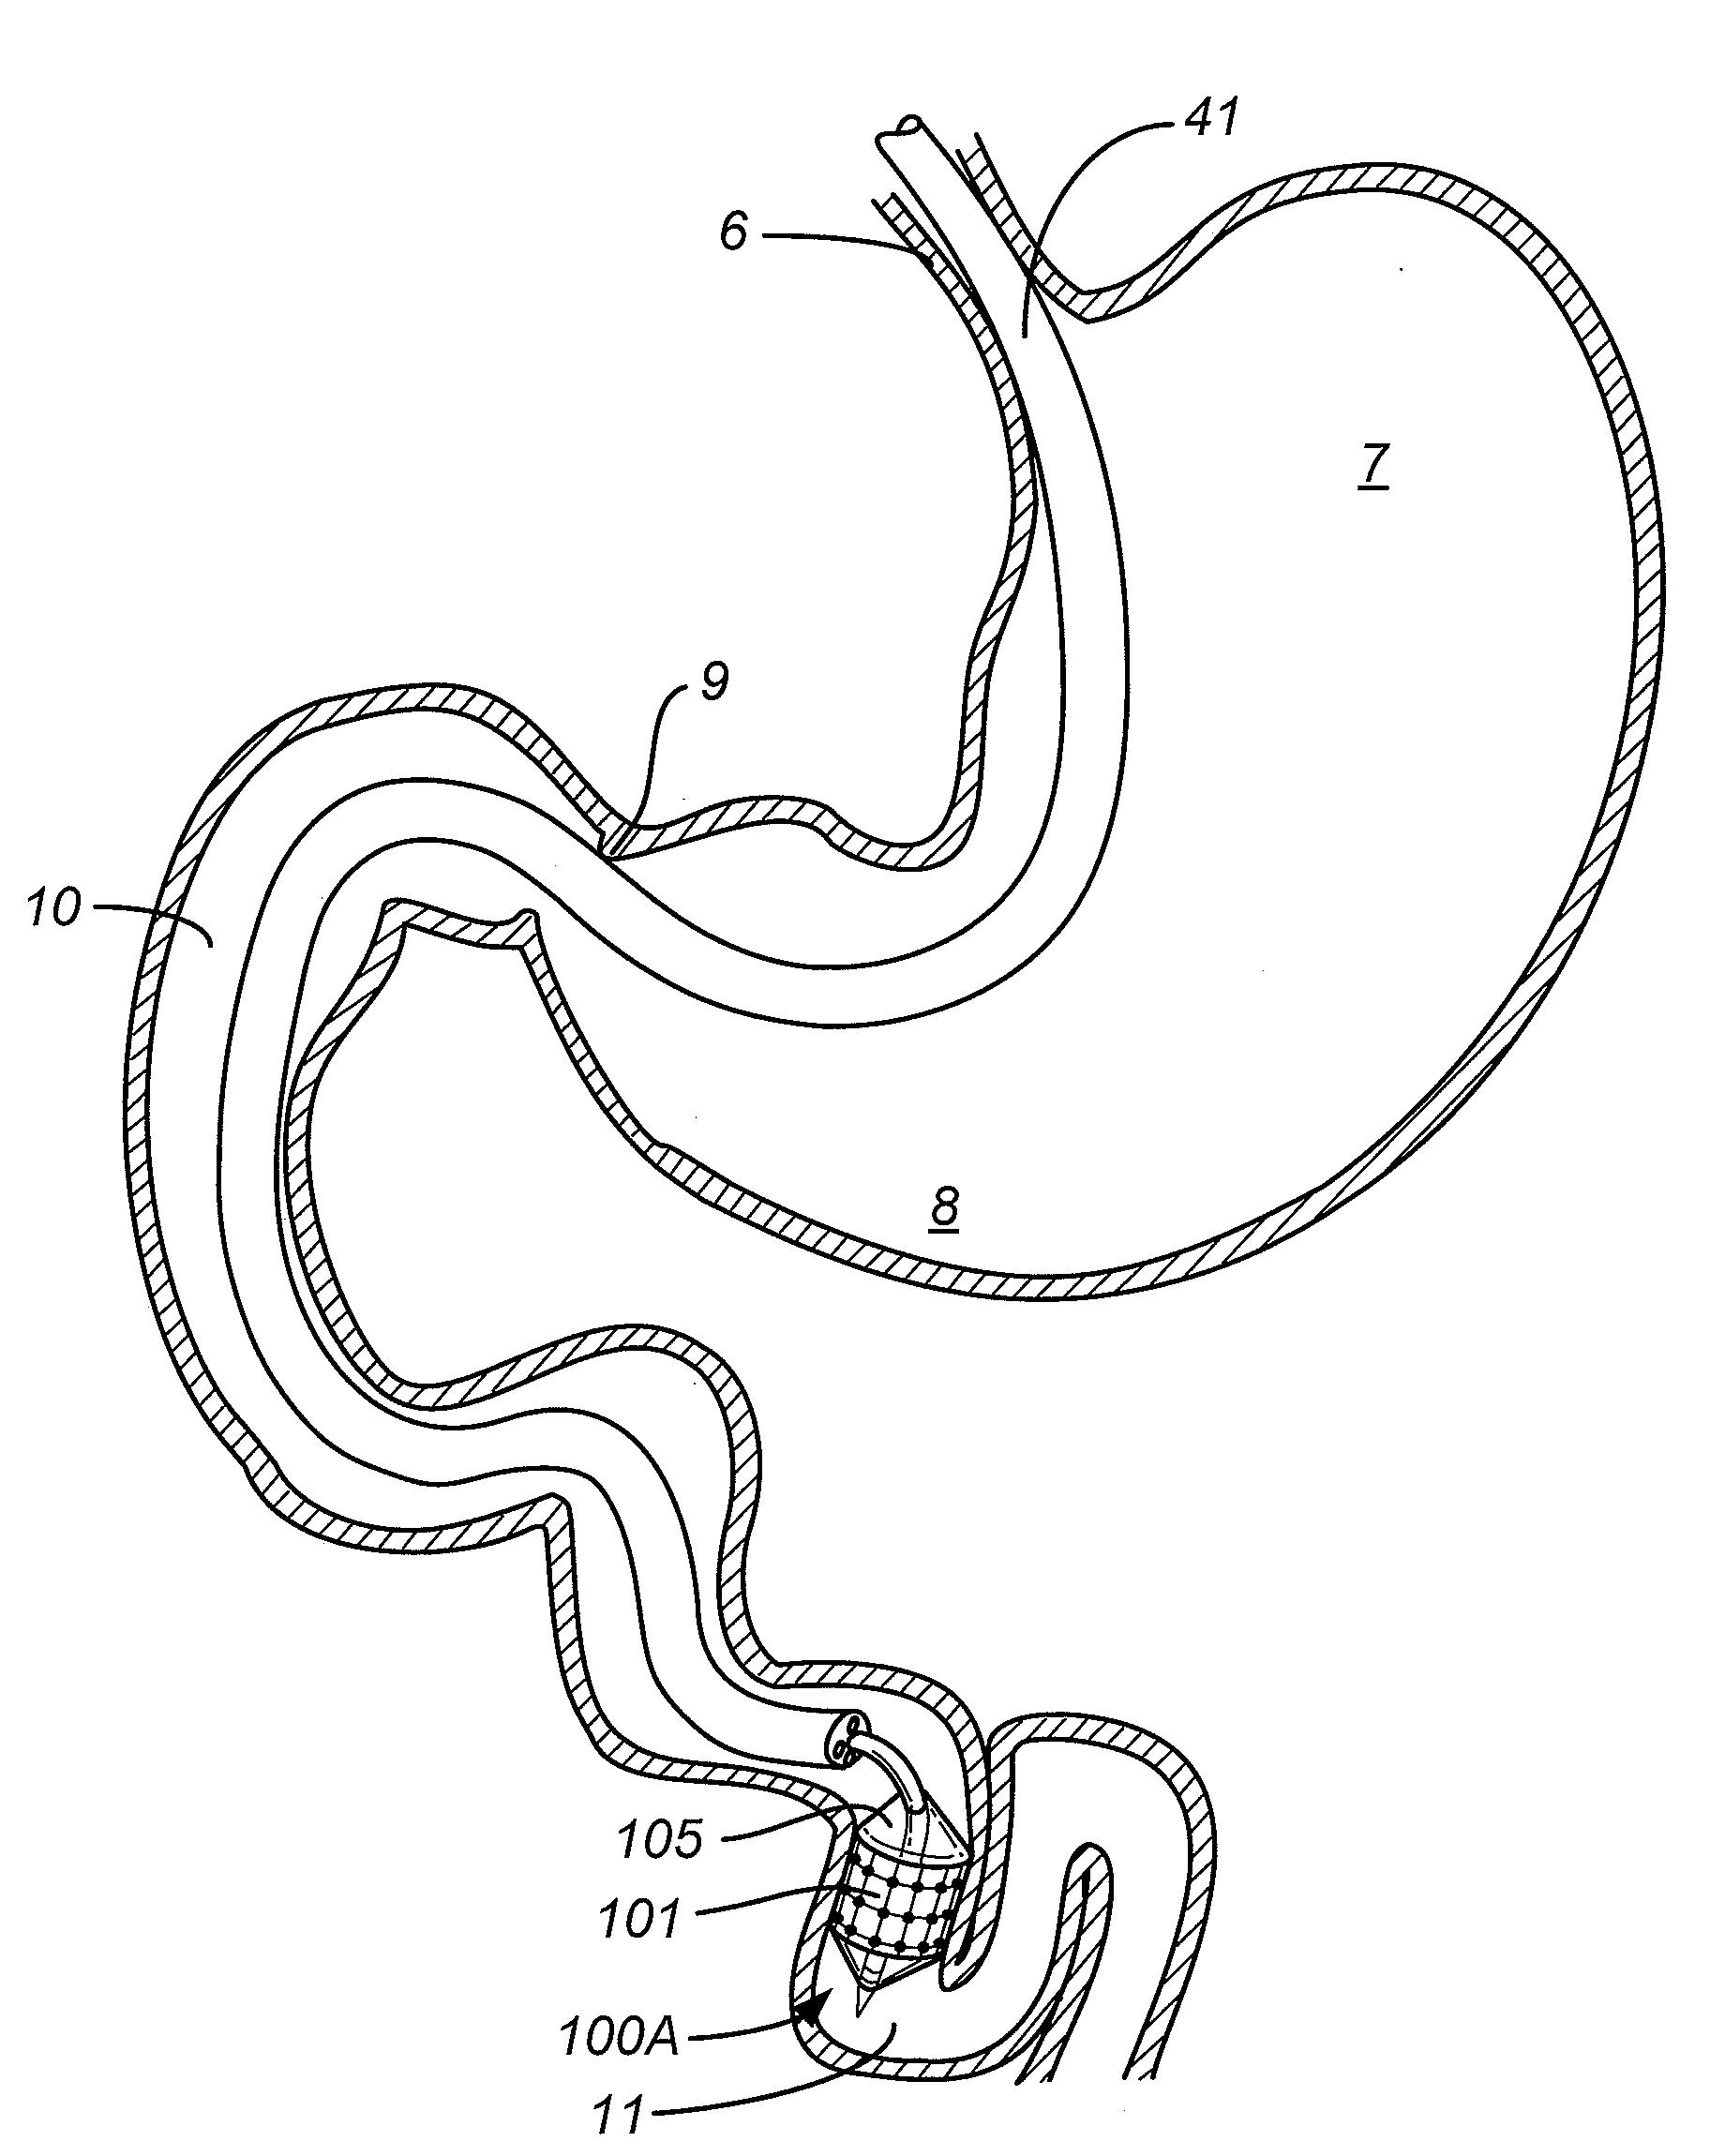 Method and apparatus for gastrointestinal tract ablation for treatment of obesity